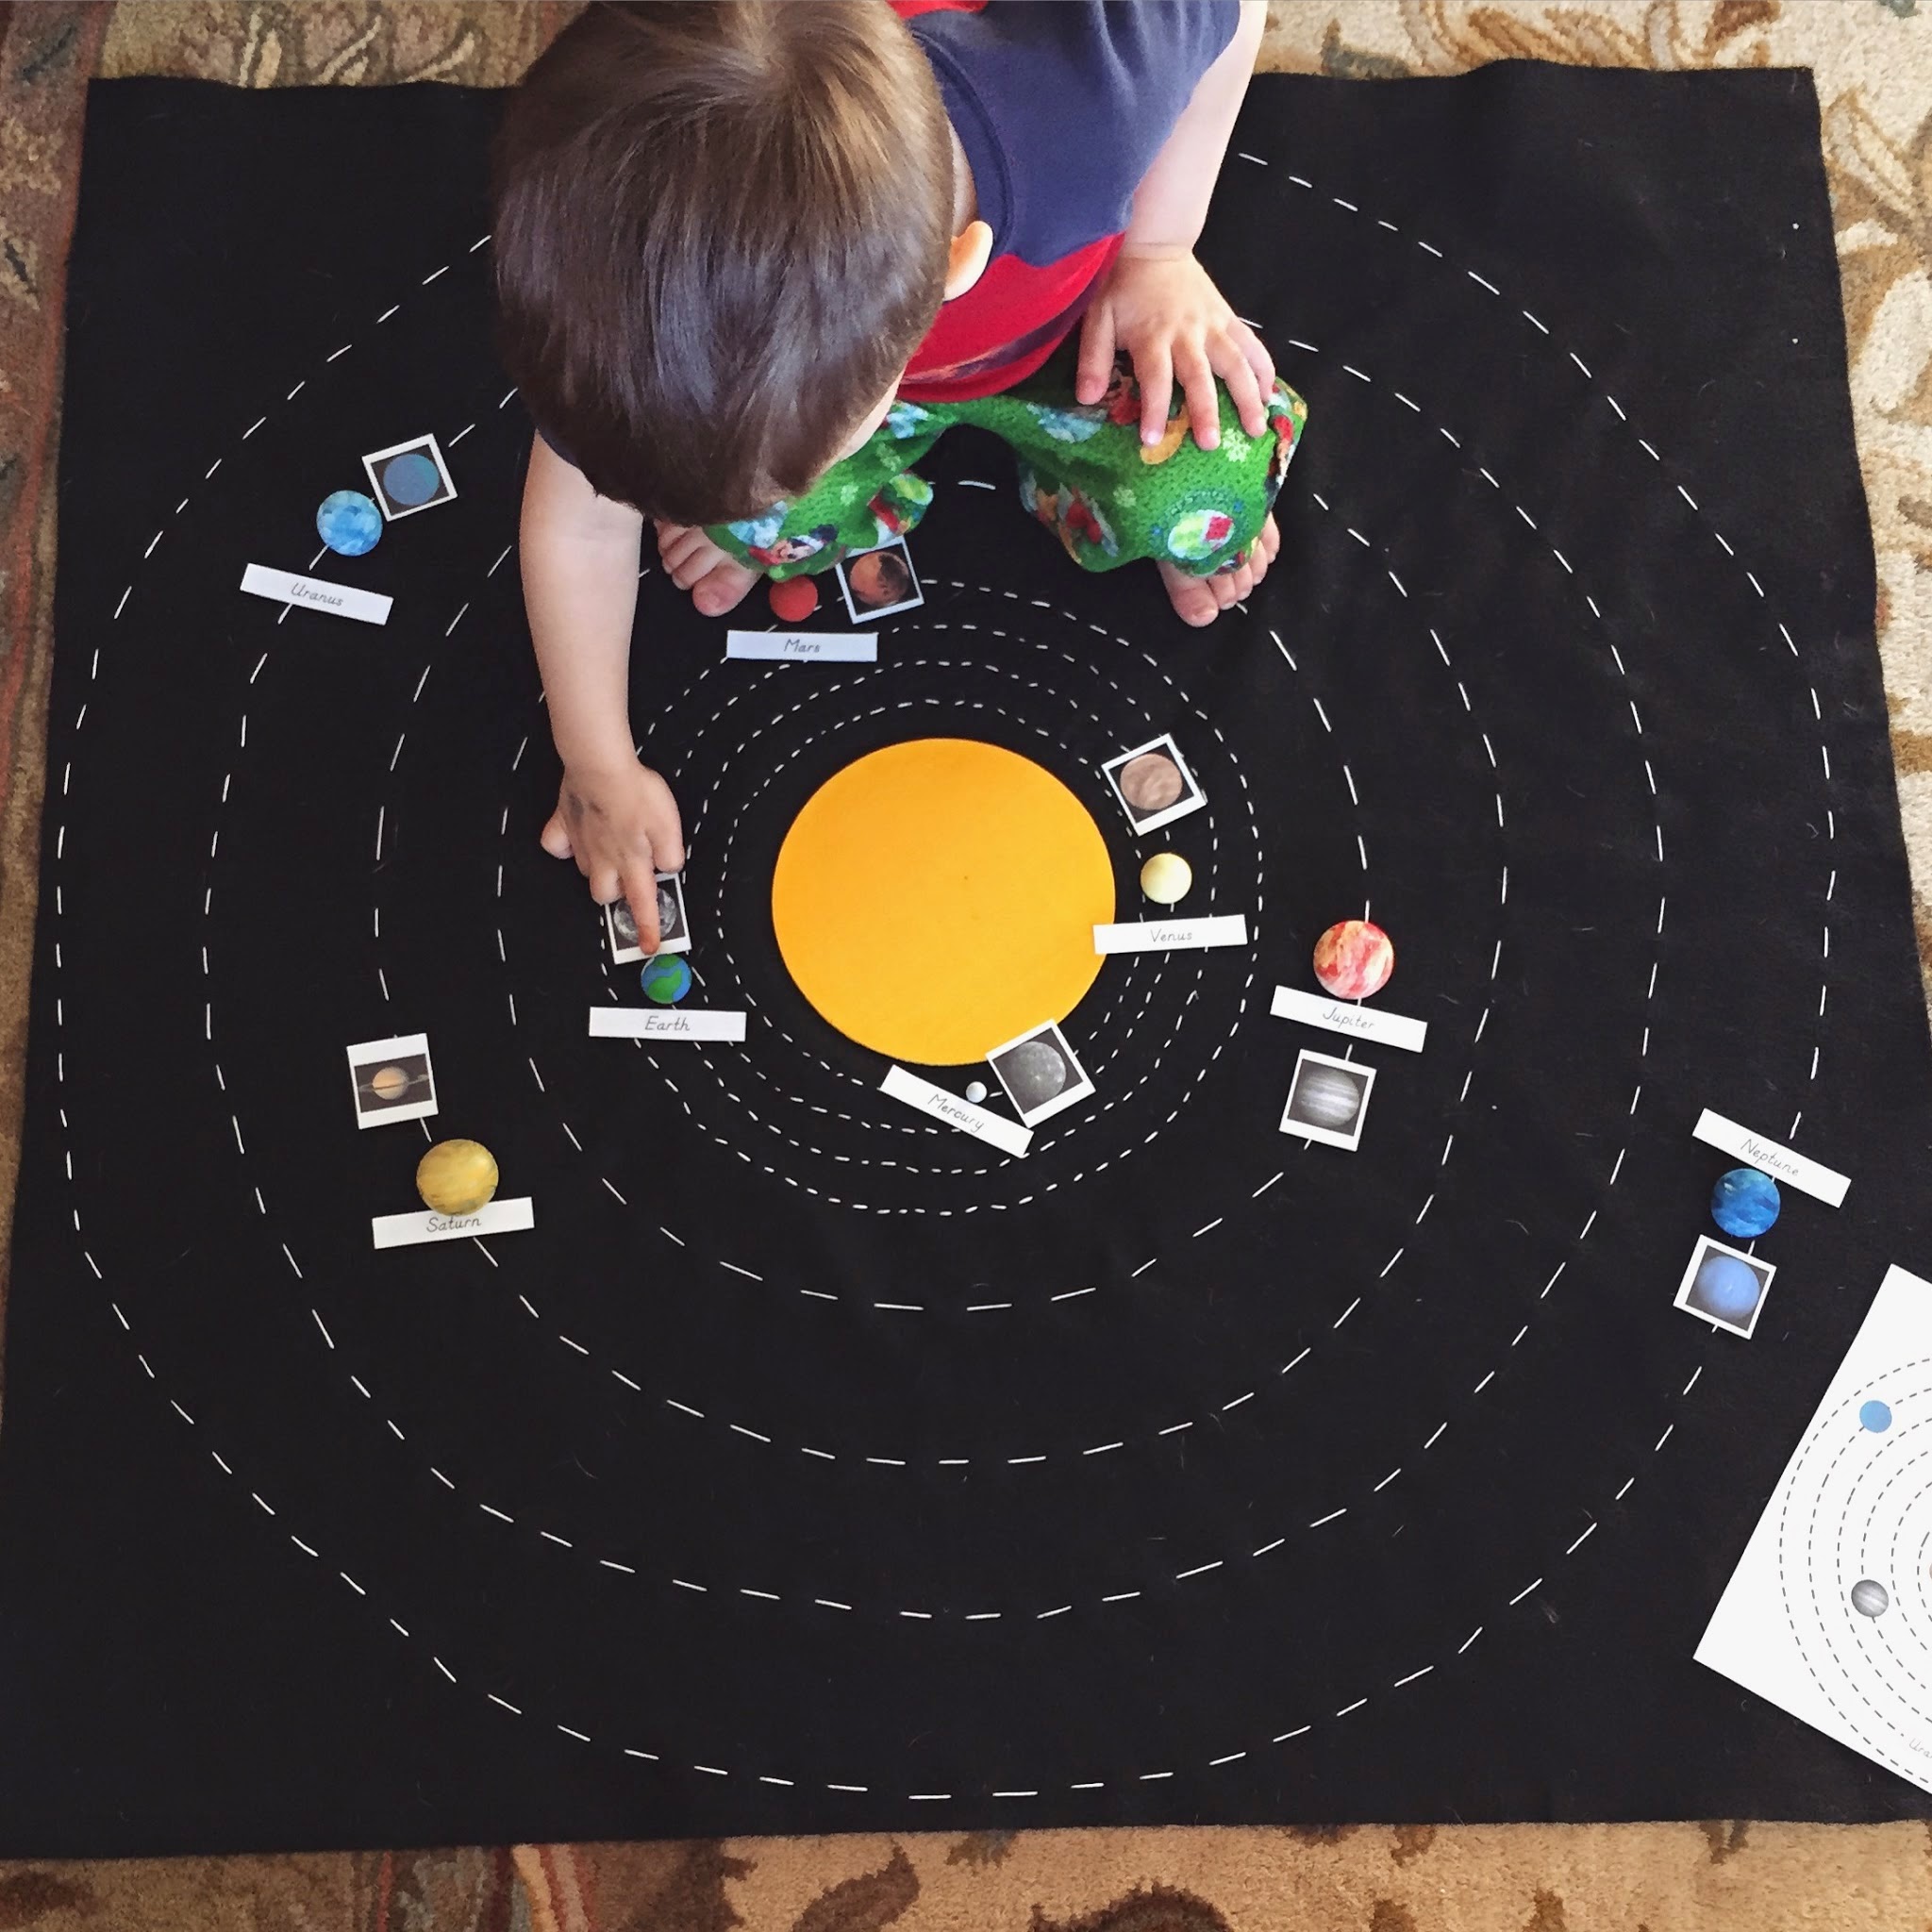 DIY Solar System Map - this Montessori inspired felt map is a great way to teach children about the solar system in a concrete way. With individual planets and orbits children can learn how the solar system is organized as they study it!